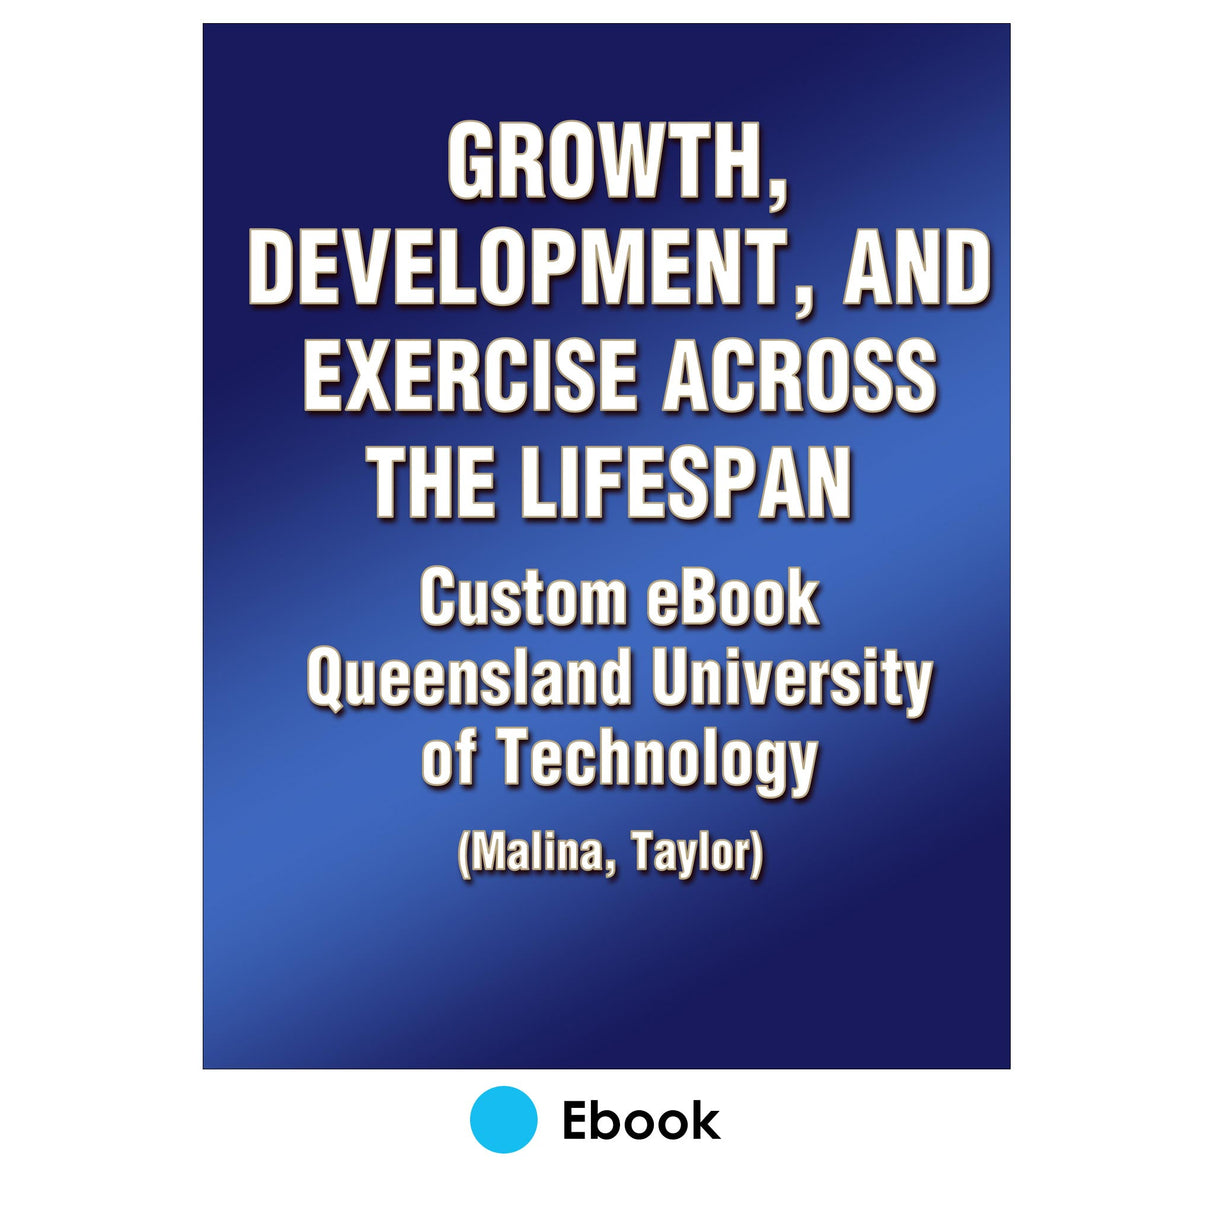 Growth, Development and Exercise Across the Lifespan Custom eBook: Queensland University of Technology (Malina, Taylor)